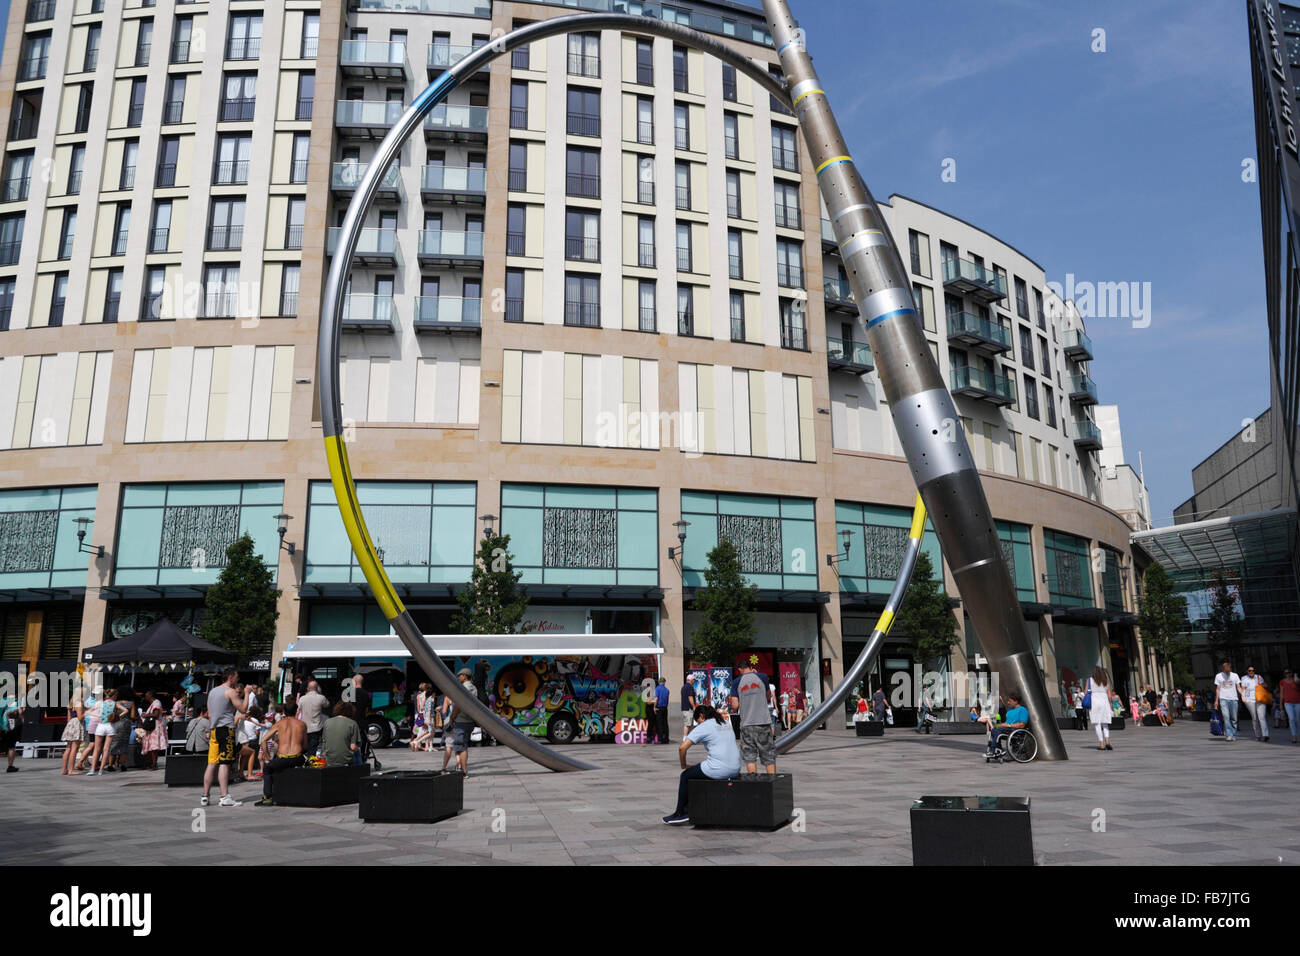 St Davids 2 Building Shops and Flats, die Hayes Cardiff City Centre Wales UK Fußgängerzone Stockfoto